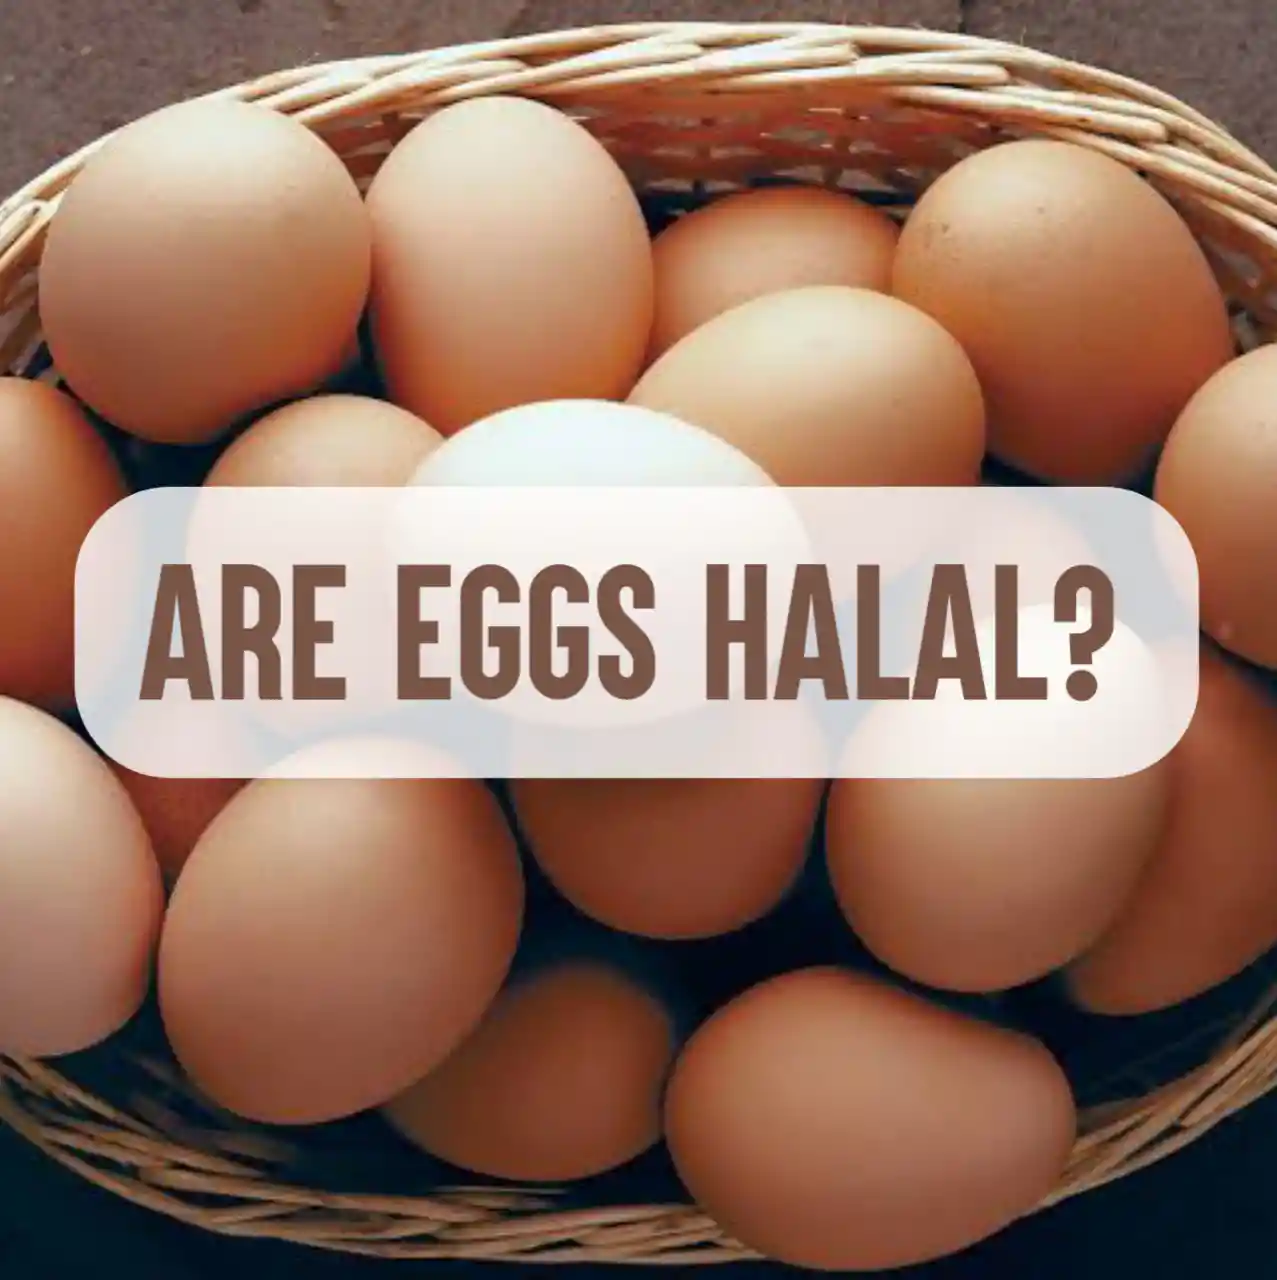 Are eggs halal